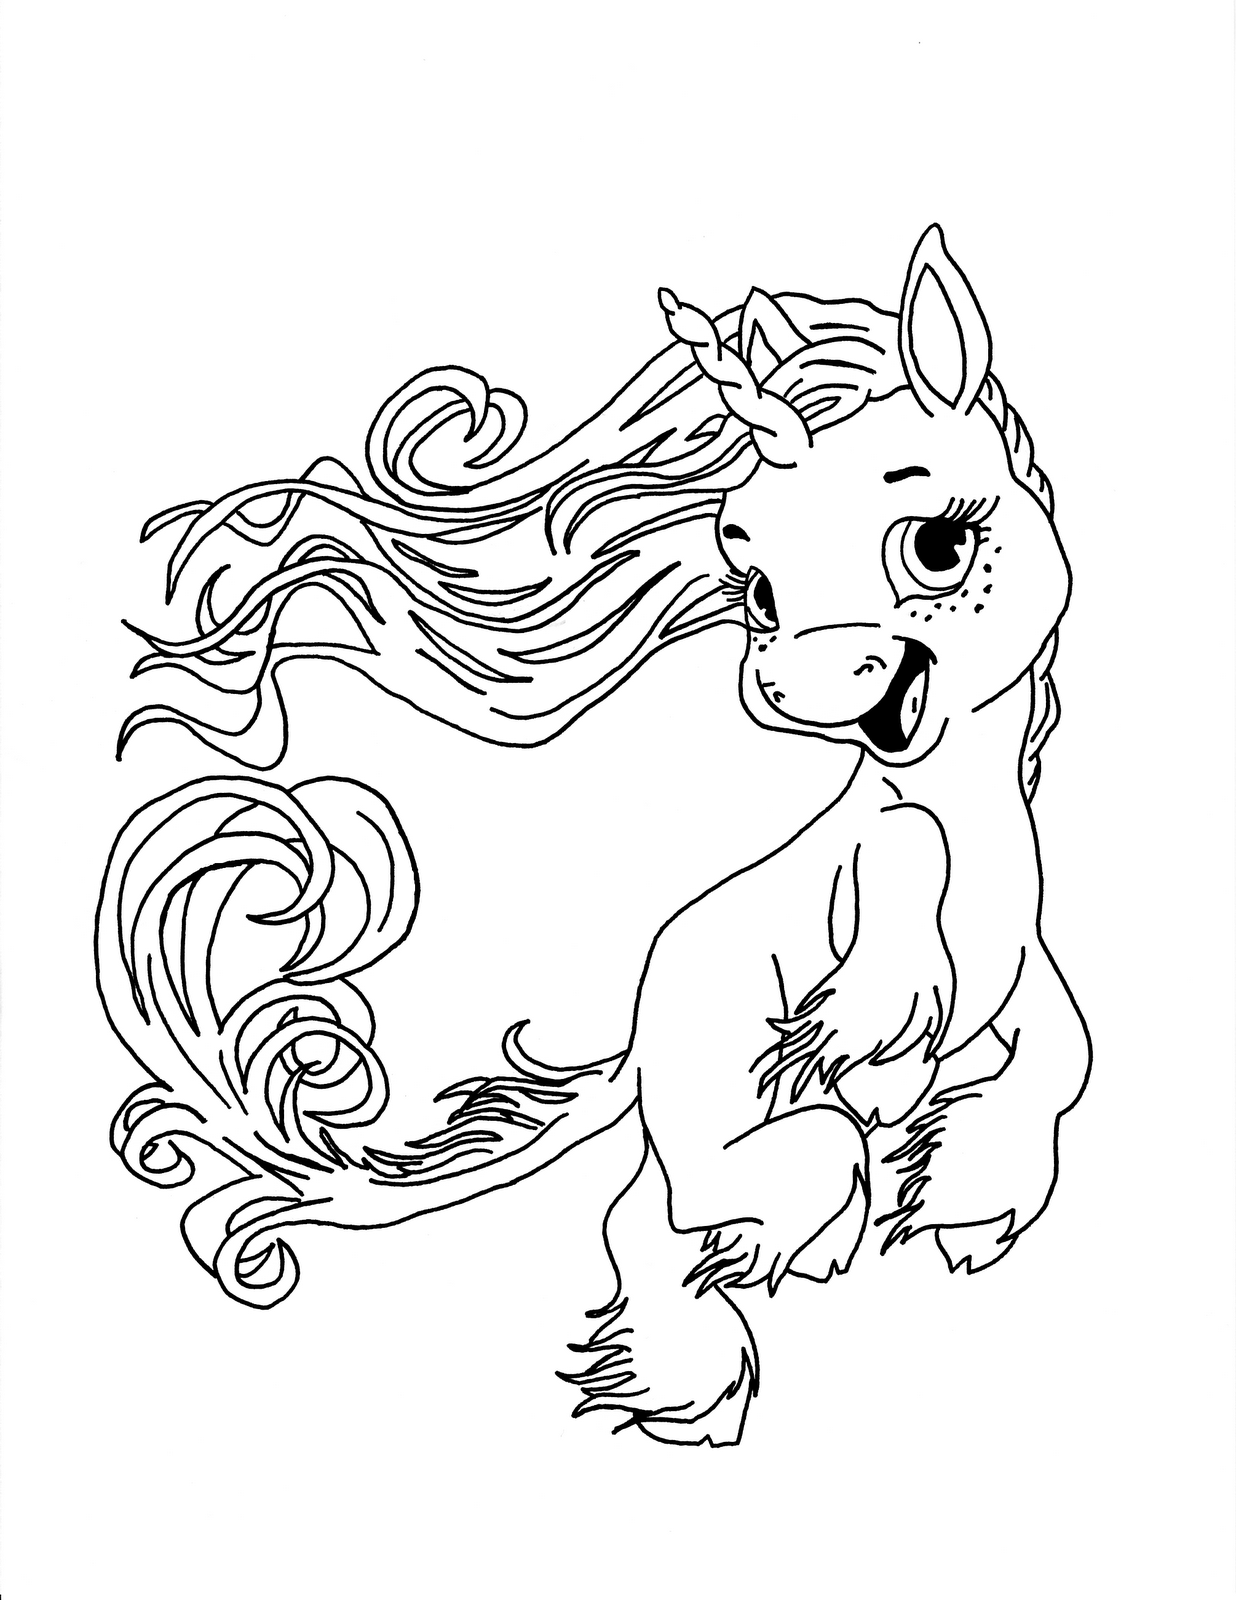 Unicorn Coloring Pages Pdf at GetColorings.com | Free printable